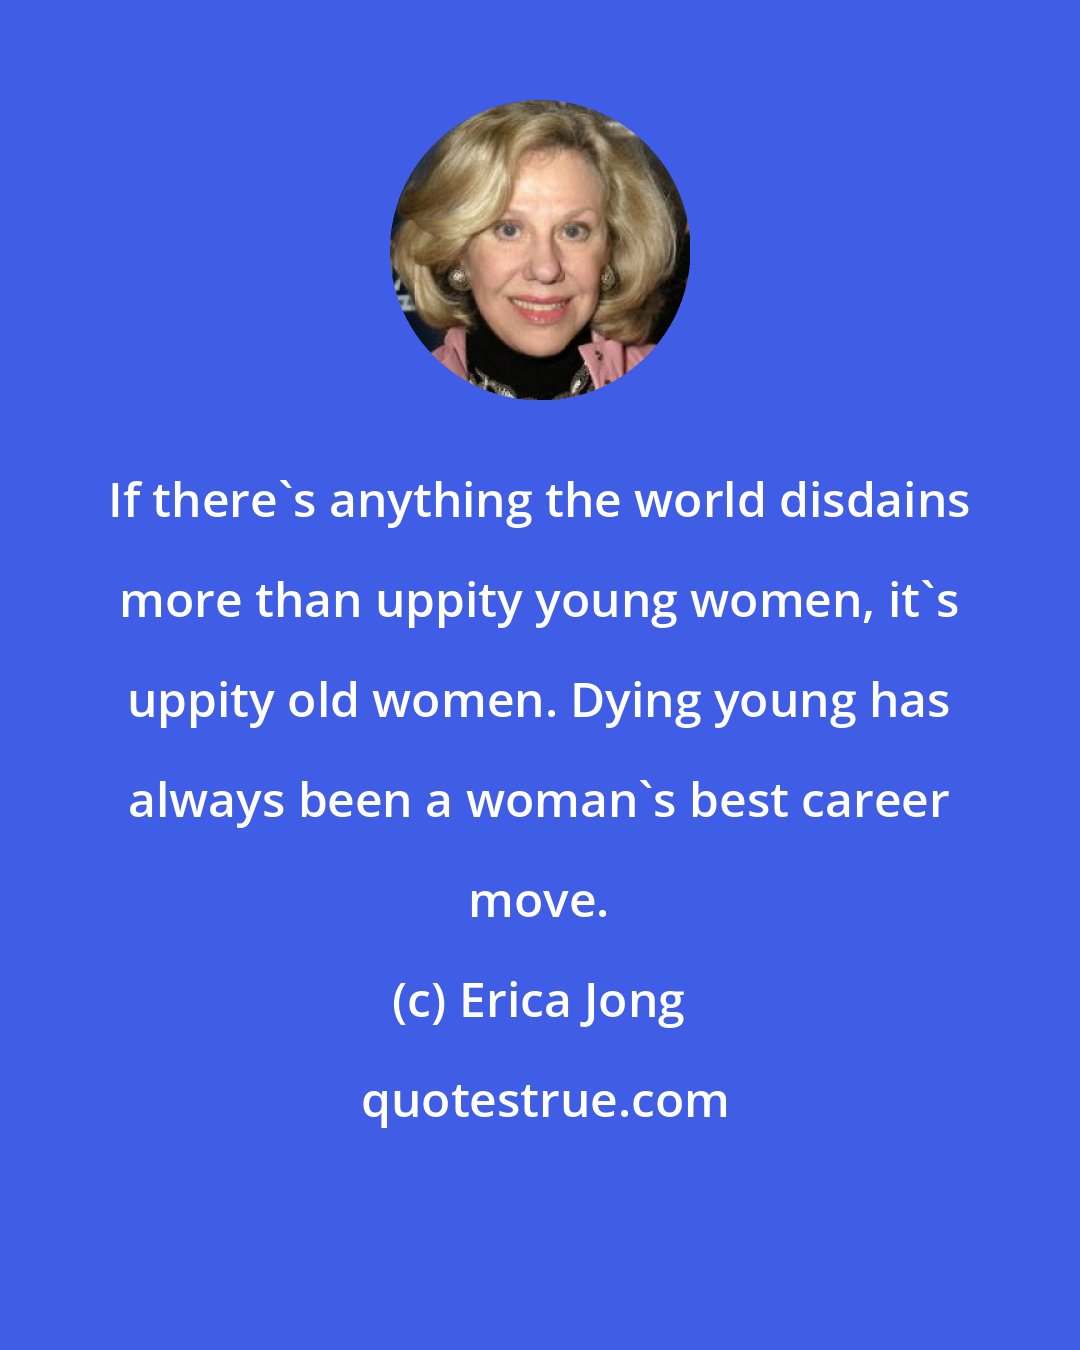 Erica Jong: If there's anything the world disdains more than uppity young women, it's uppity old women. Dying young has always been a woman's best career move.